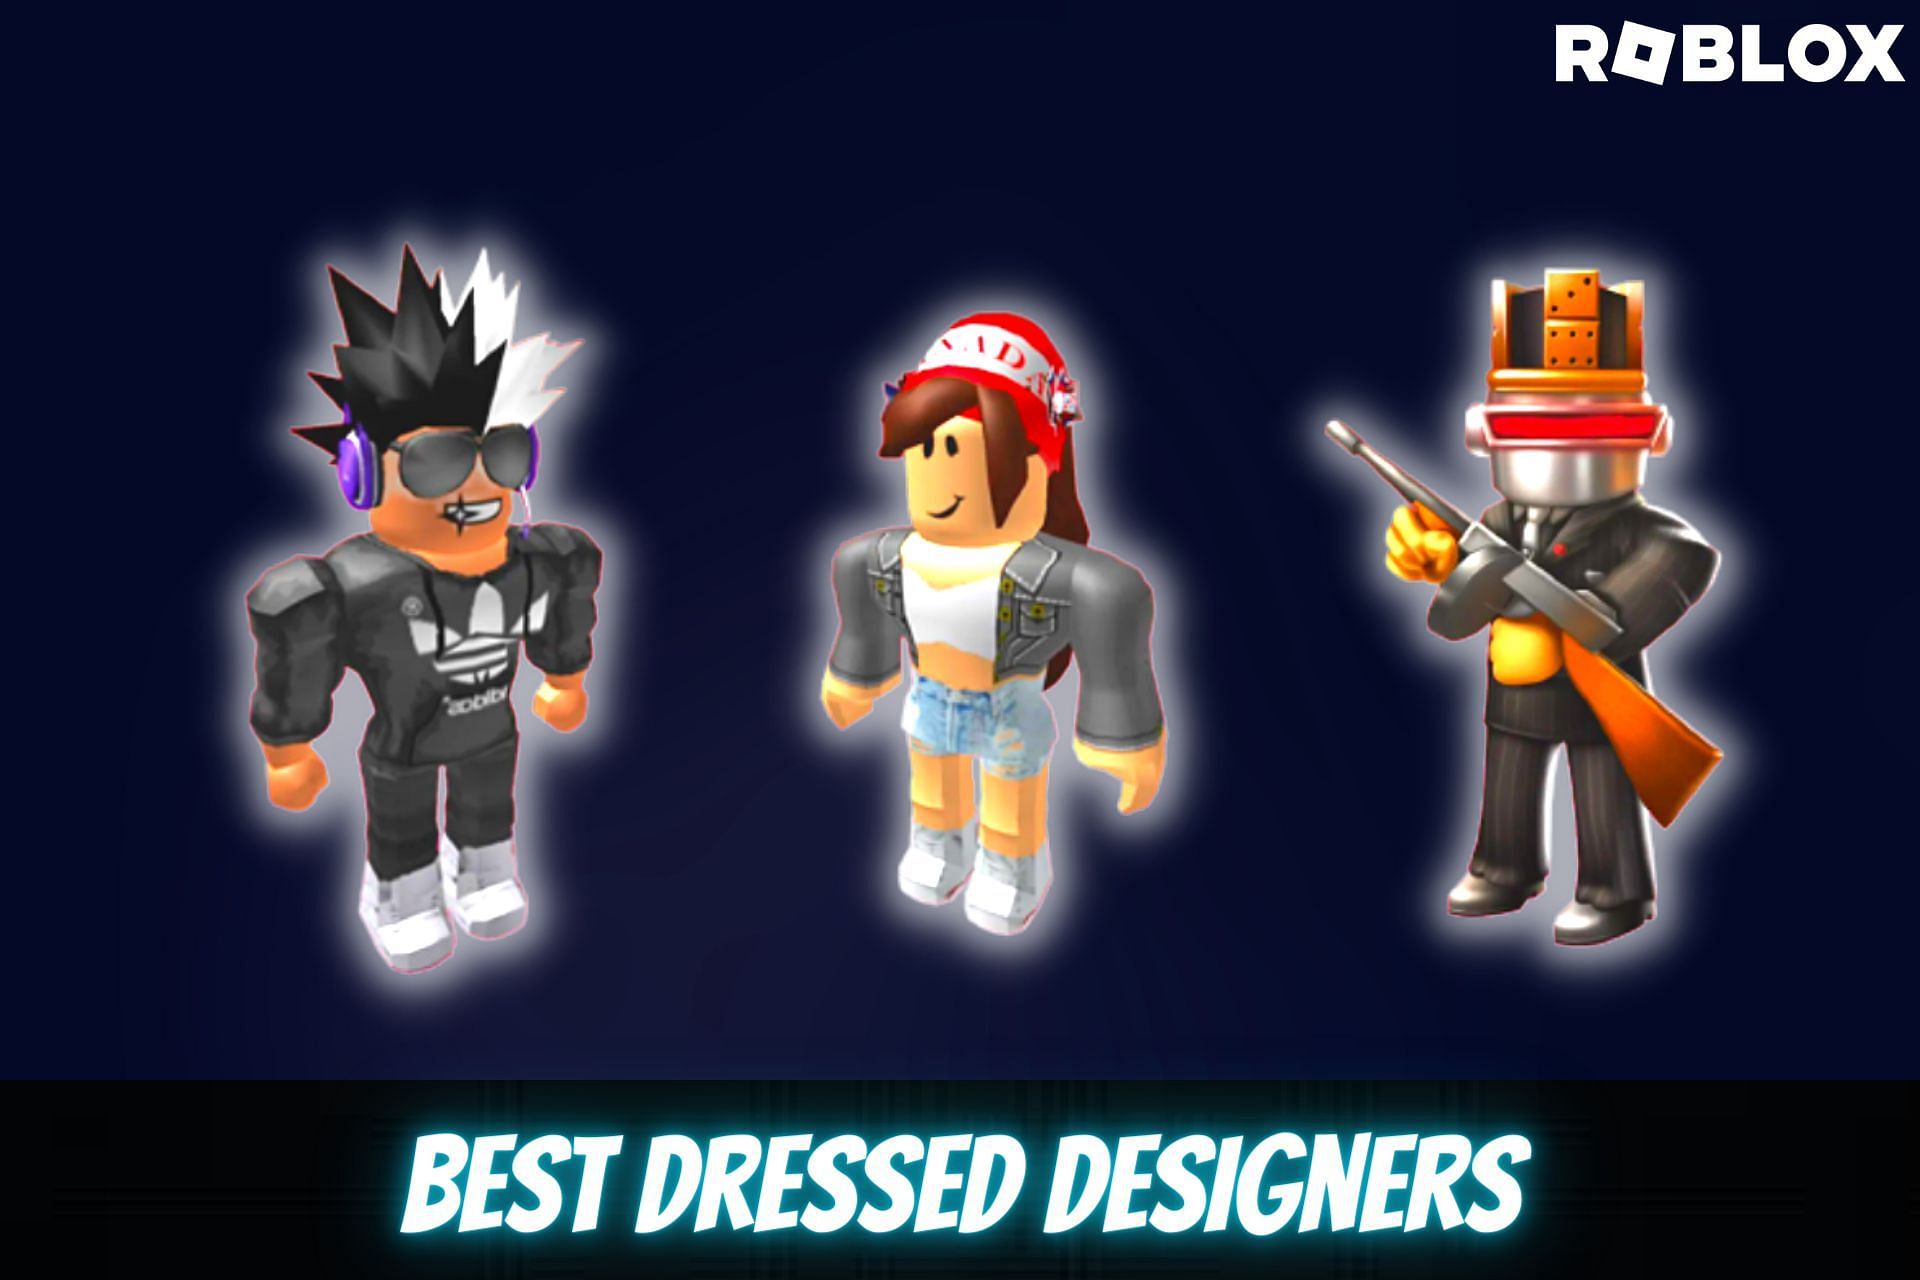 Designing Textured Clothing  ROBLOX Clothing Tutorial 